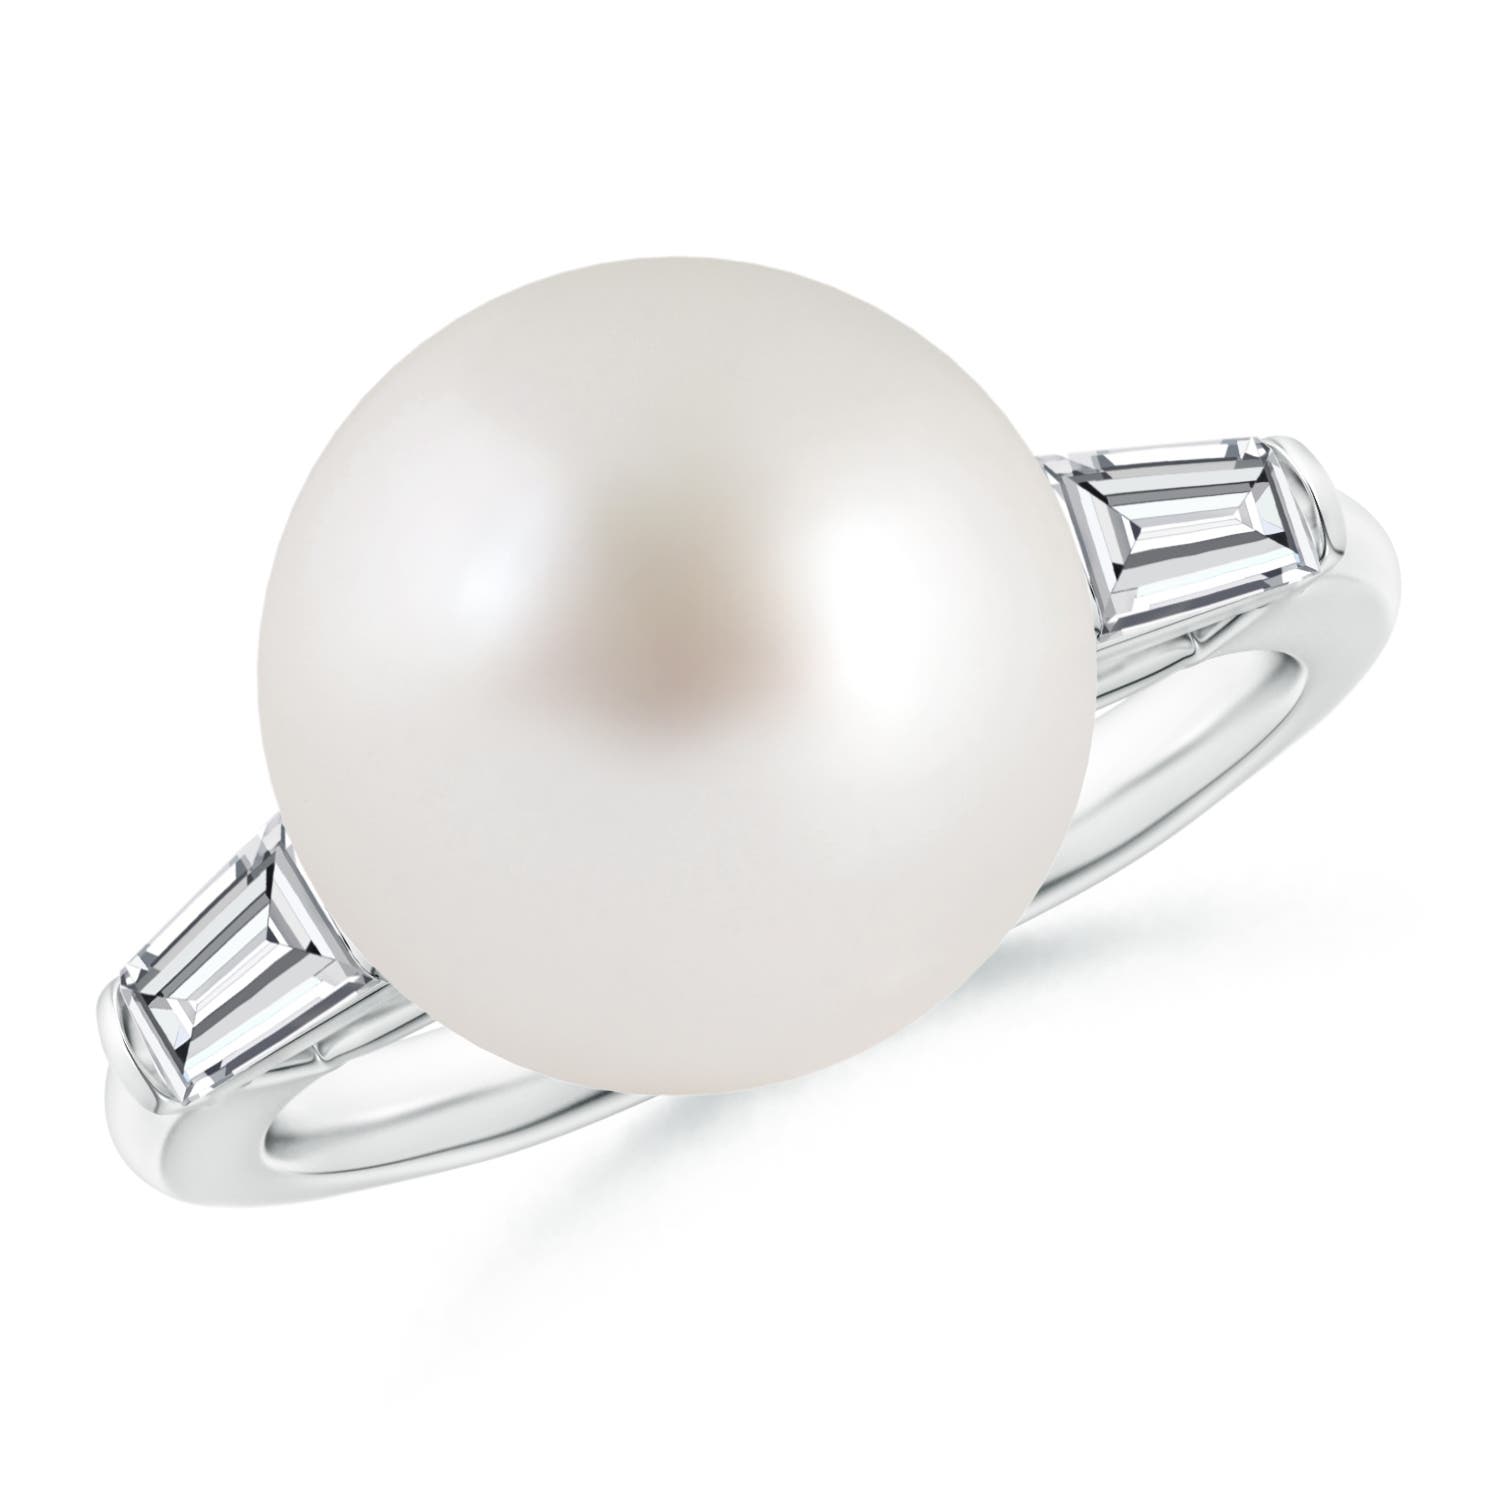 Freshwater Cultured Pearl Ring White Topaz Sterling Silver | Jared